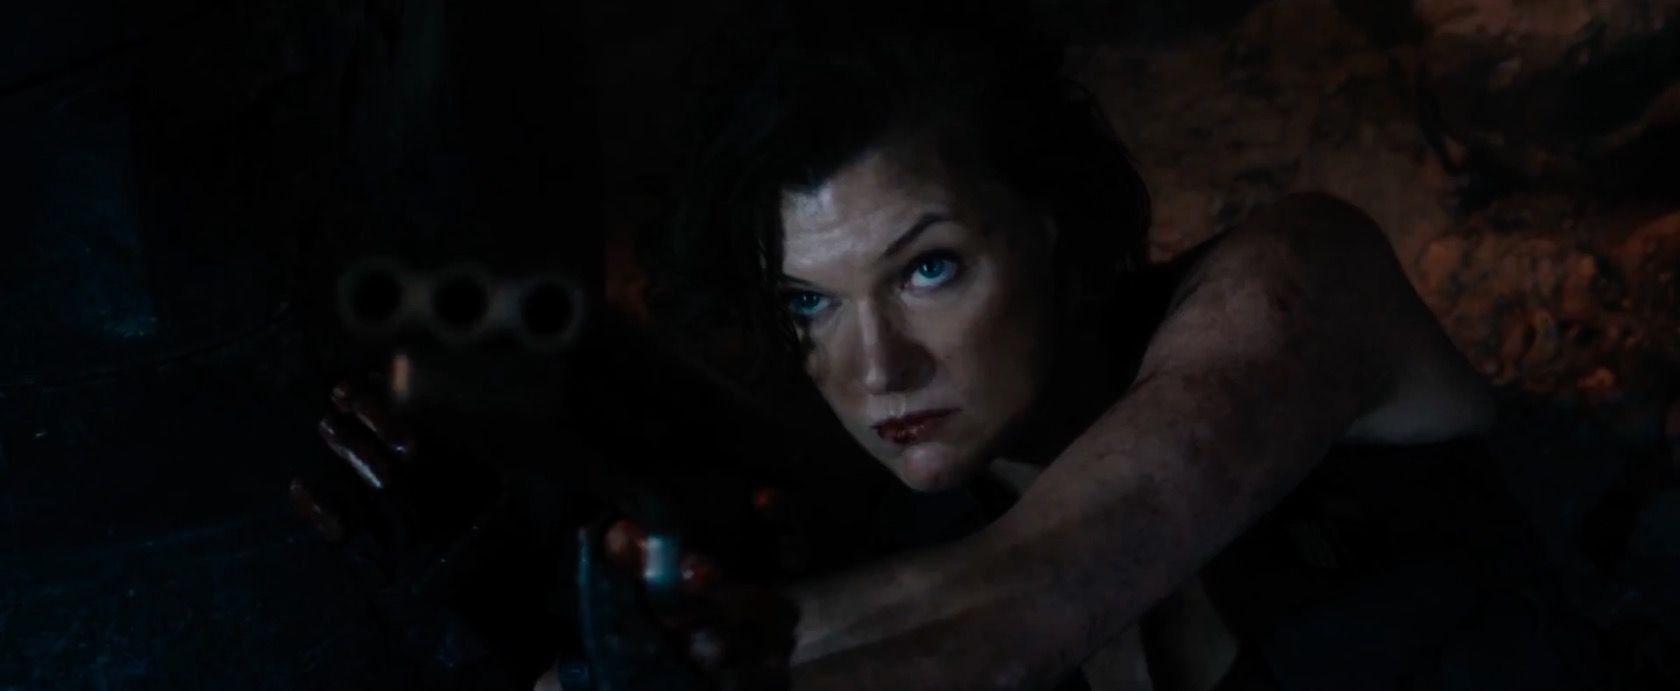 Resident Evil: The Final Chapter- Official trailer #2